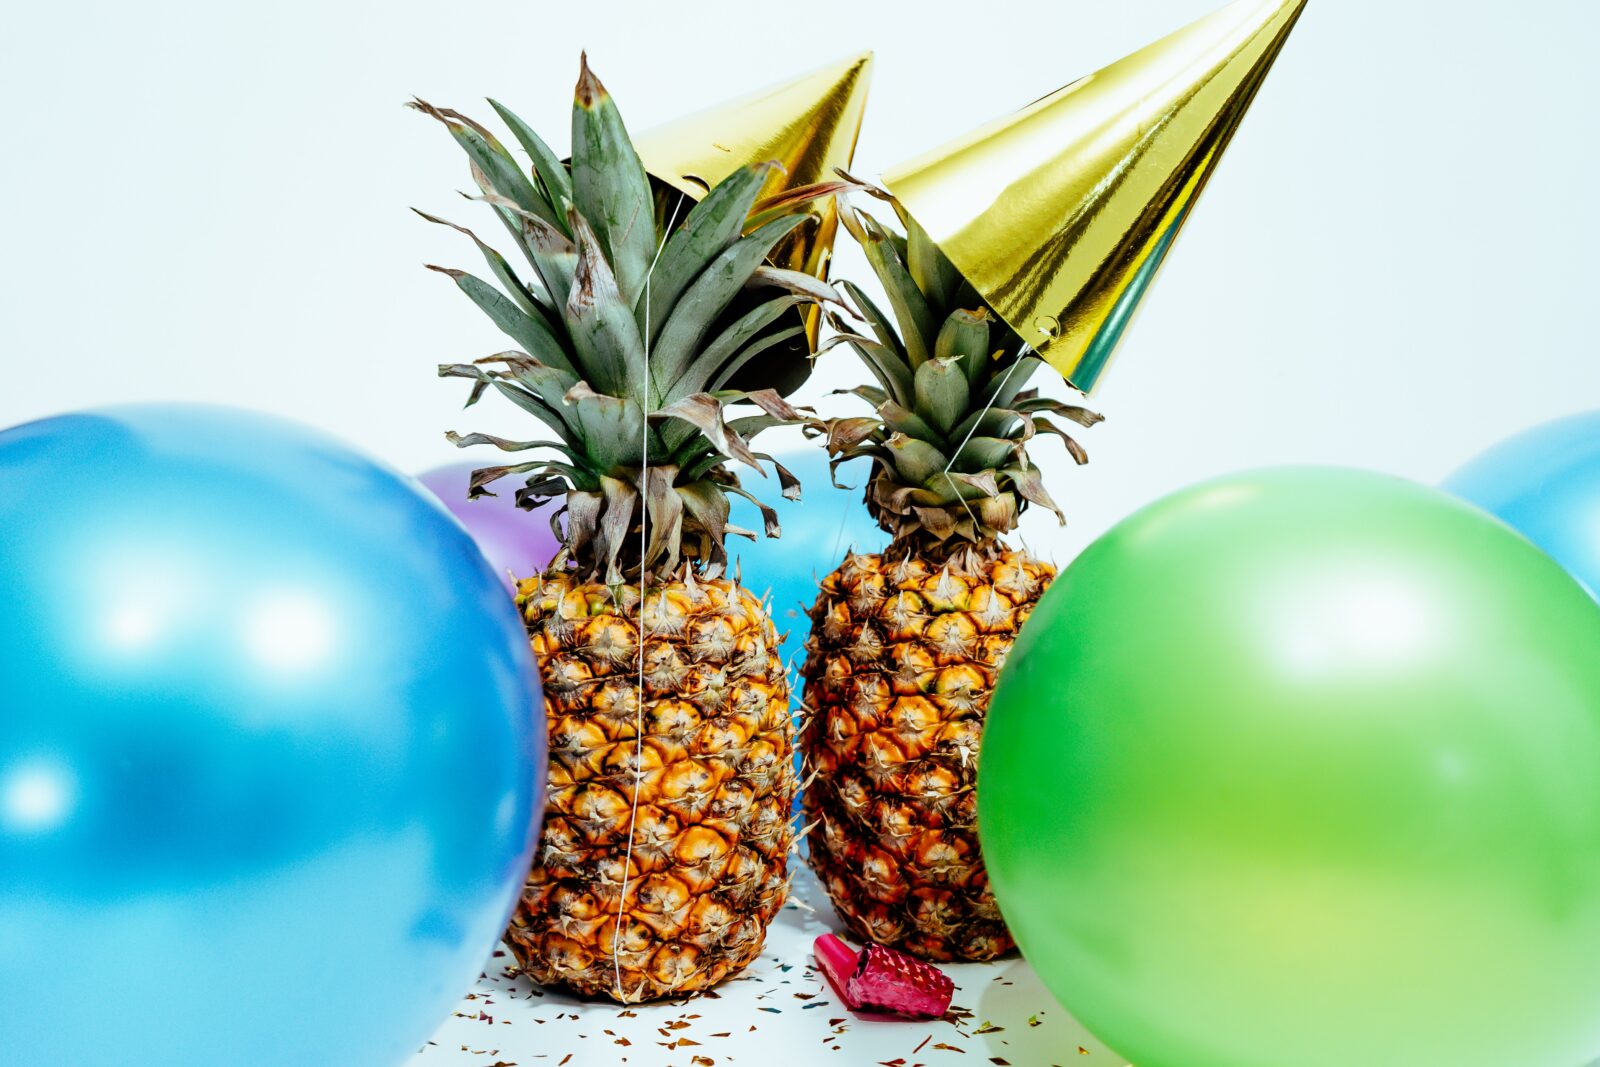 pineapple-party-arrangement-new-year-2020-new-year-resolution-entertainments-saga